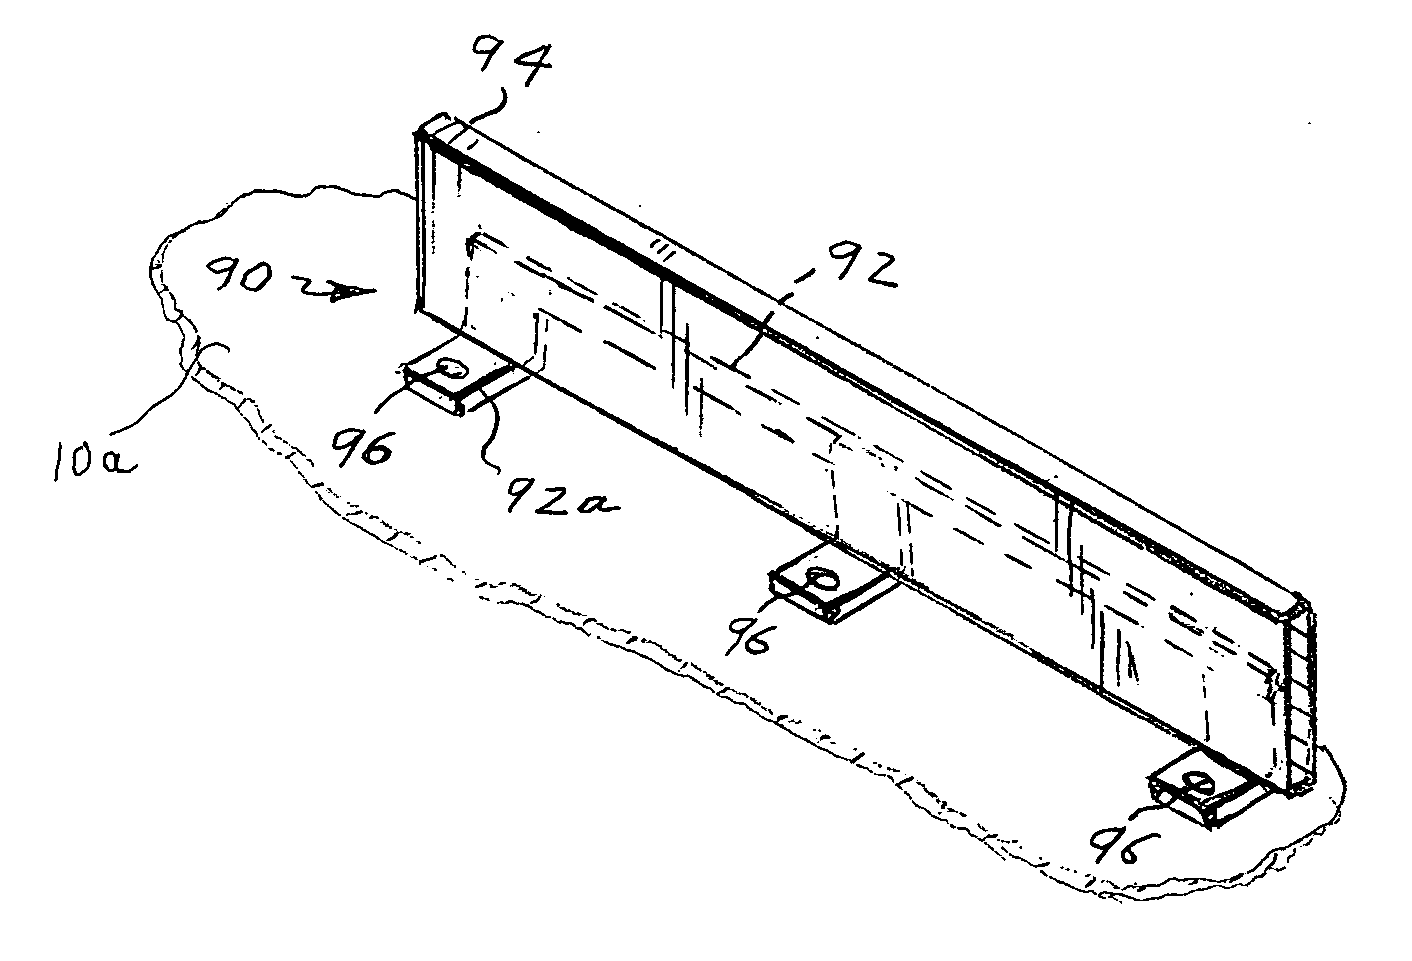 Medical instrument retainer assembly and method of making the retainer